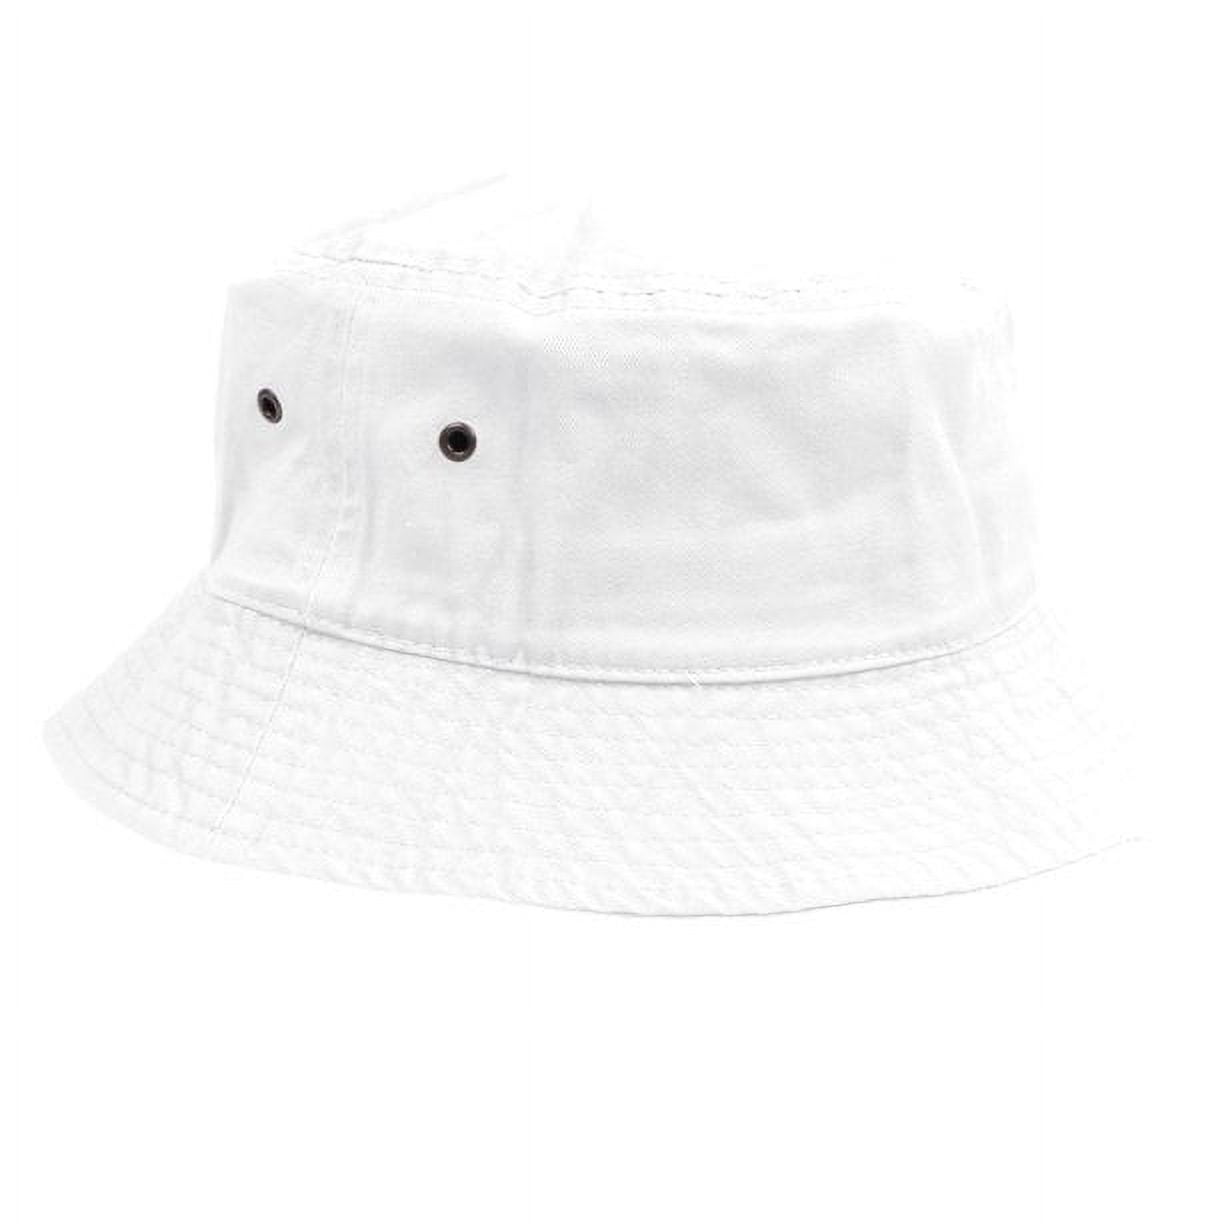 WILLBEST Bucket Hats for Men Large Size Head Mens Fashion Casual